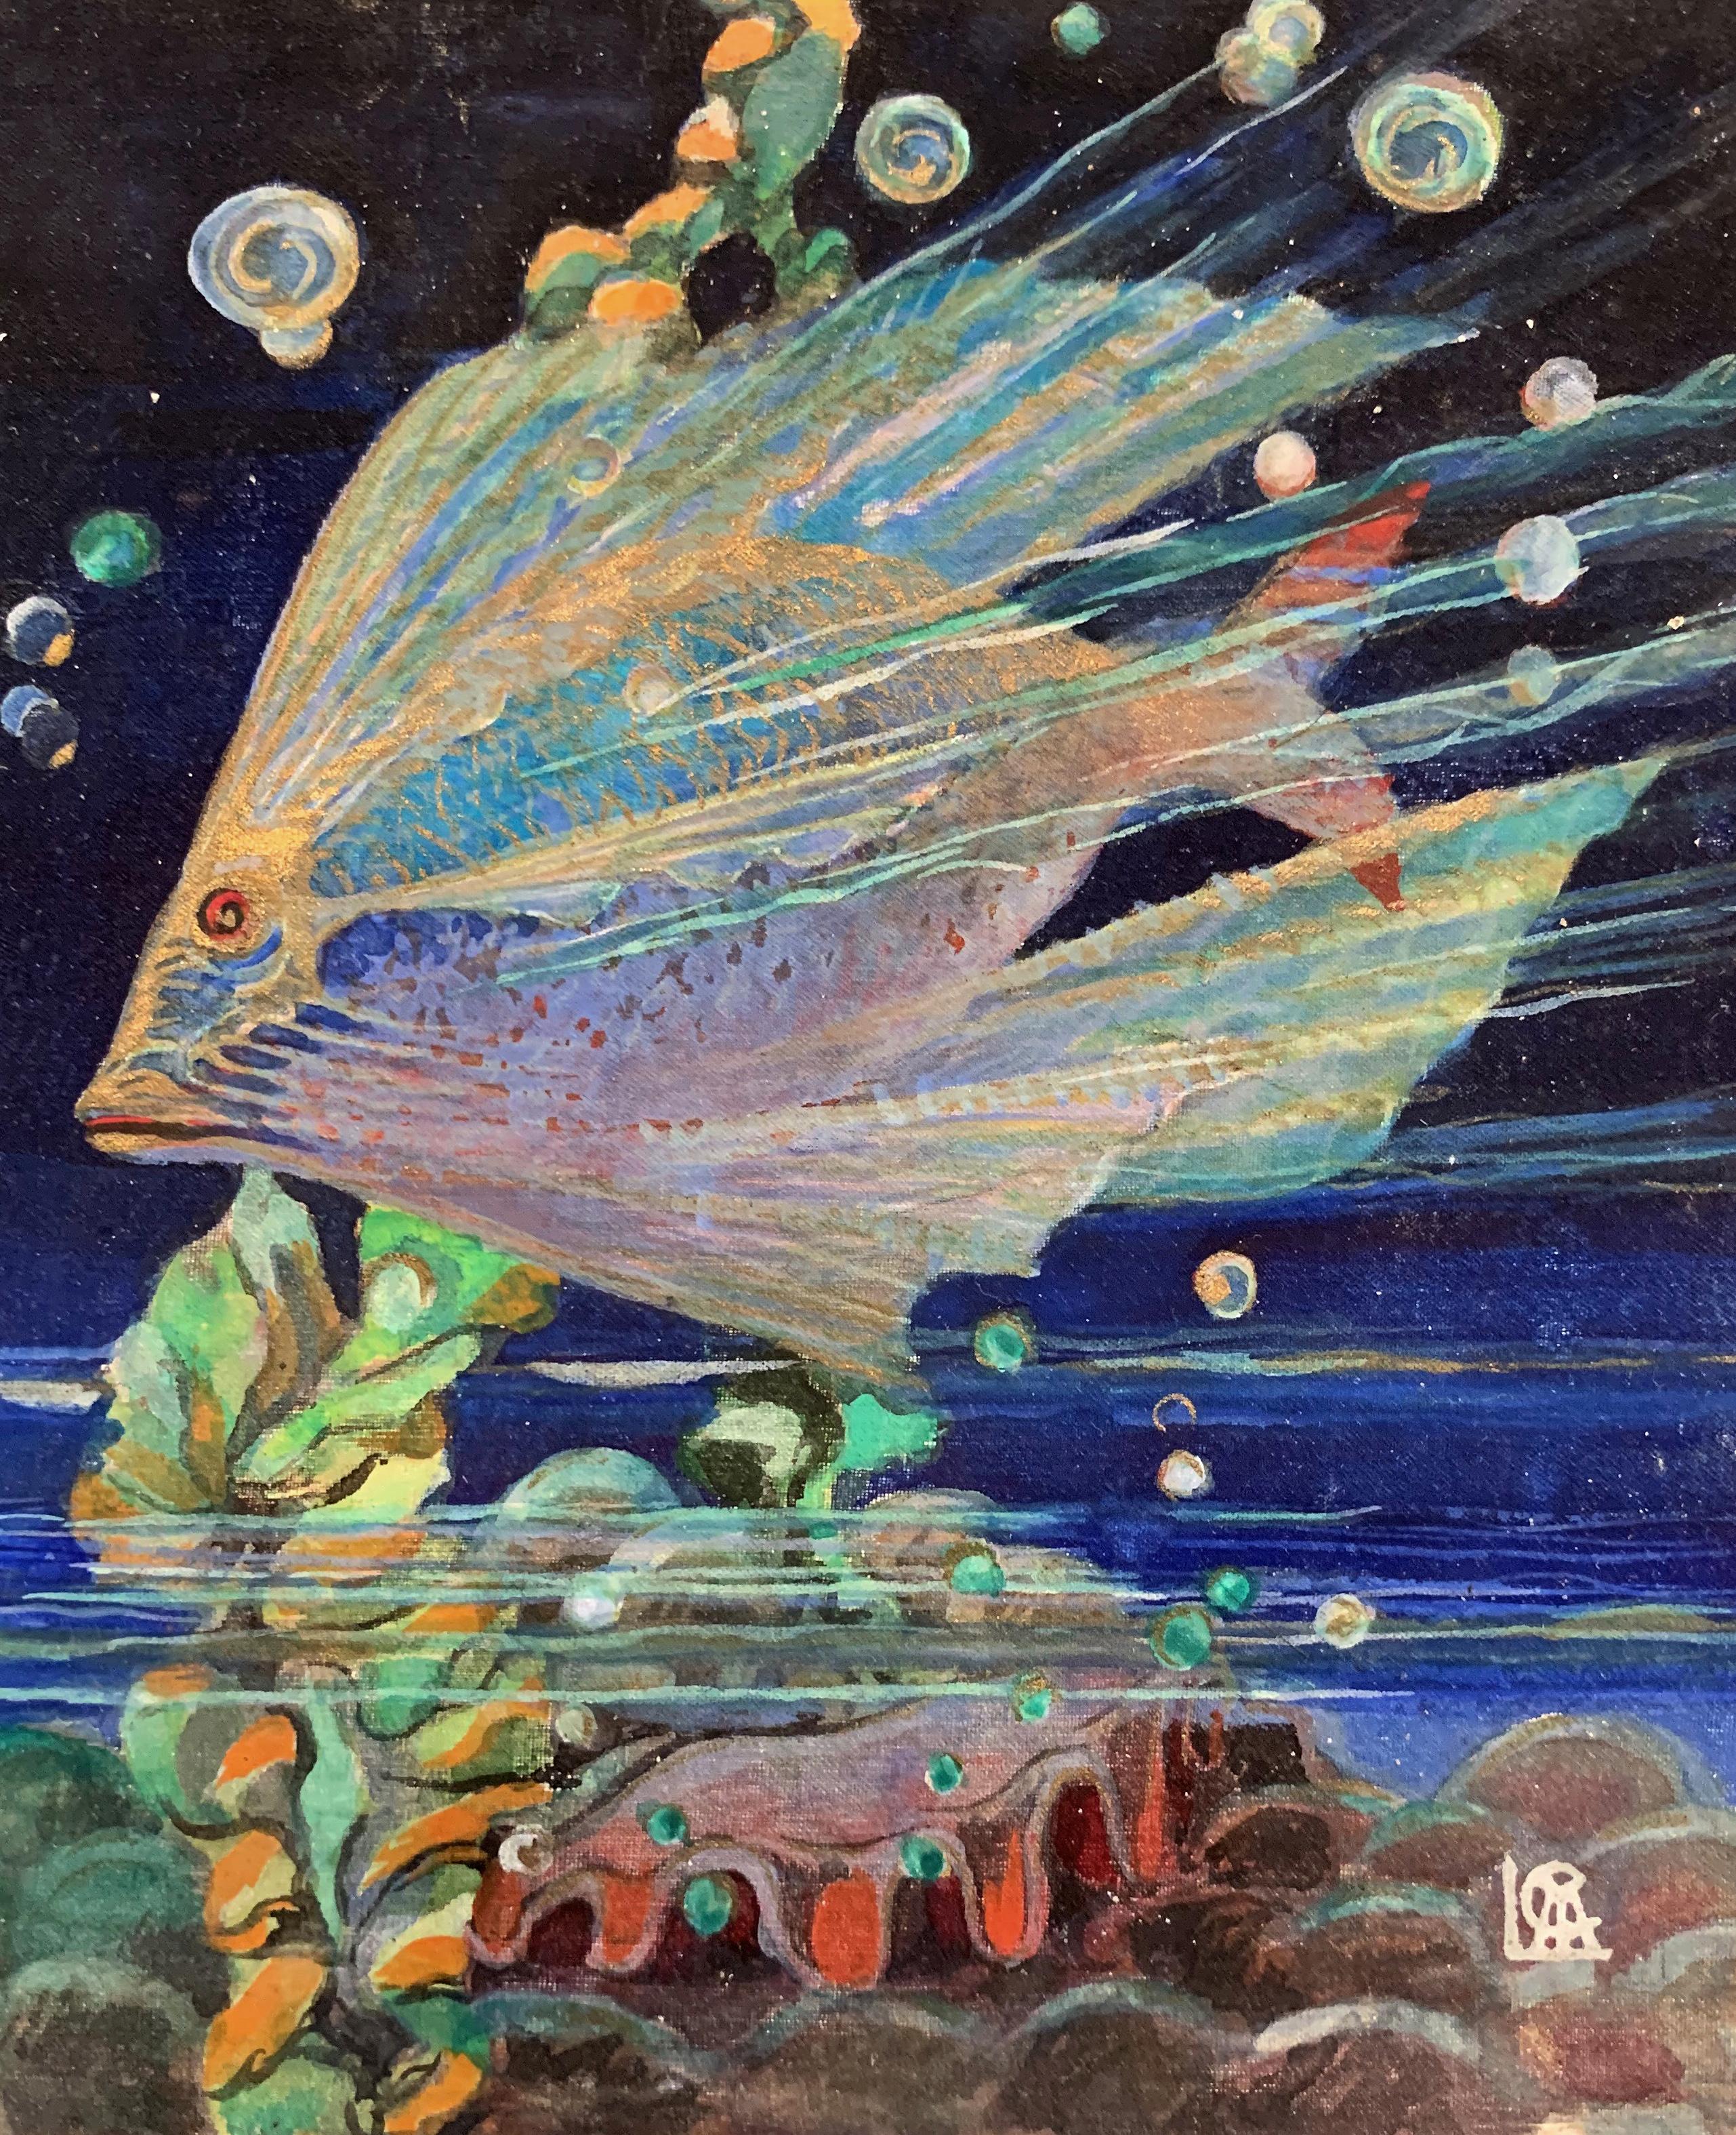 Painted with a brilliant palette and very fine detail, this depiction of a tropical fish swimming above a strand of seaweed and a giant clam, surrounded by a cloud of bubbles, is a compelling example of Art Deco decorative painting. The range of